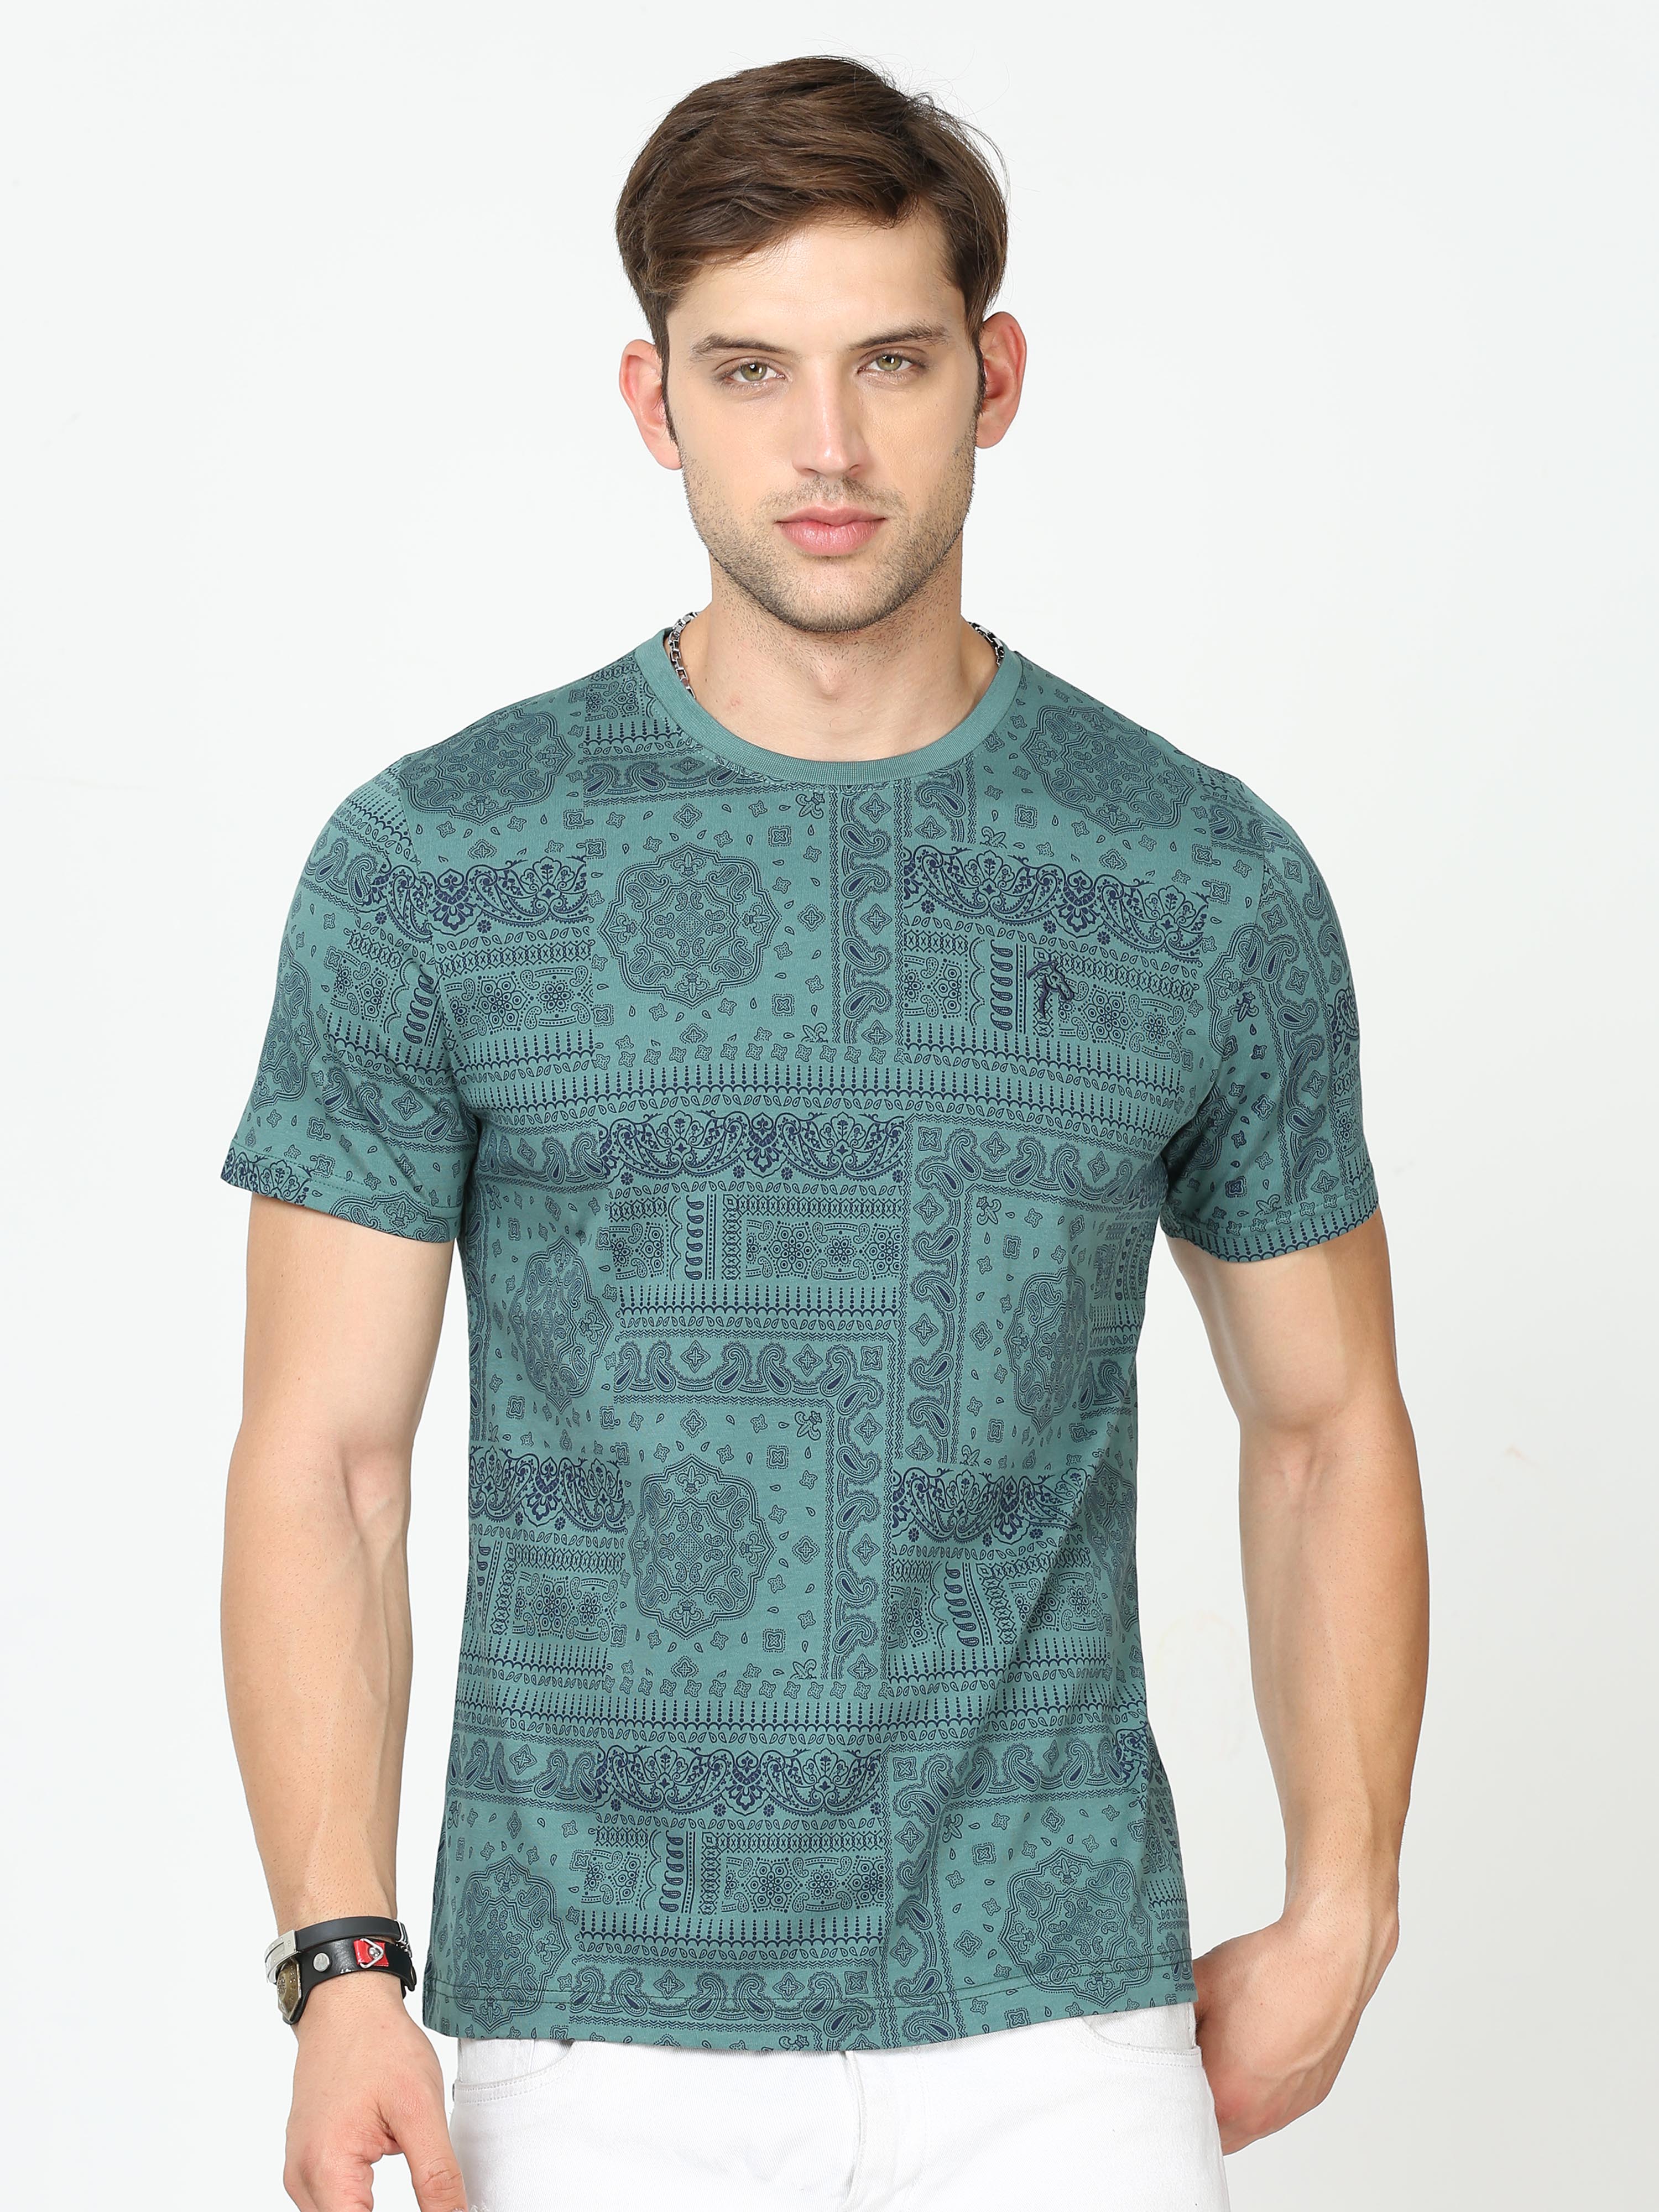 Classic Polo Mens Cotton Half Sleeves Floral Slim Fit Crew Neck Green Color T-Shirt | Brcn - 554 B Sf C